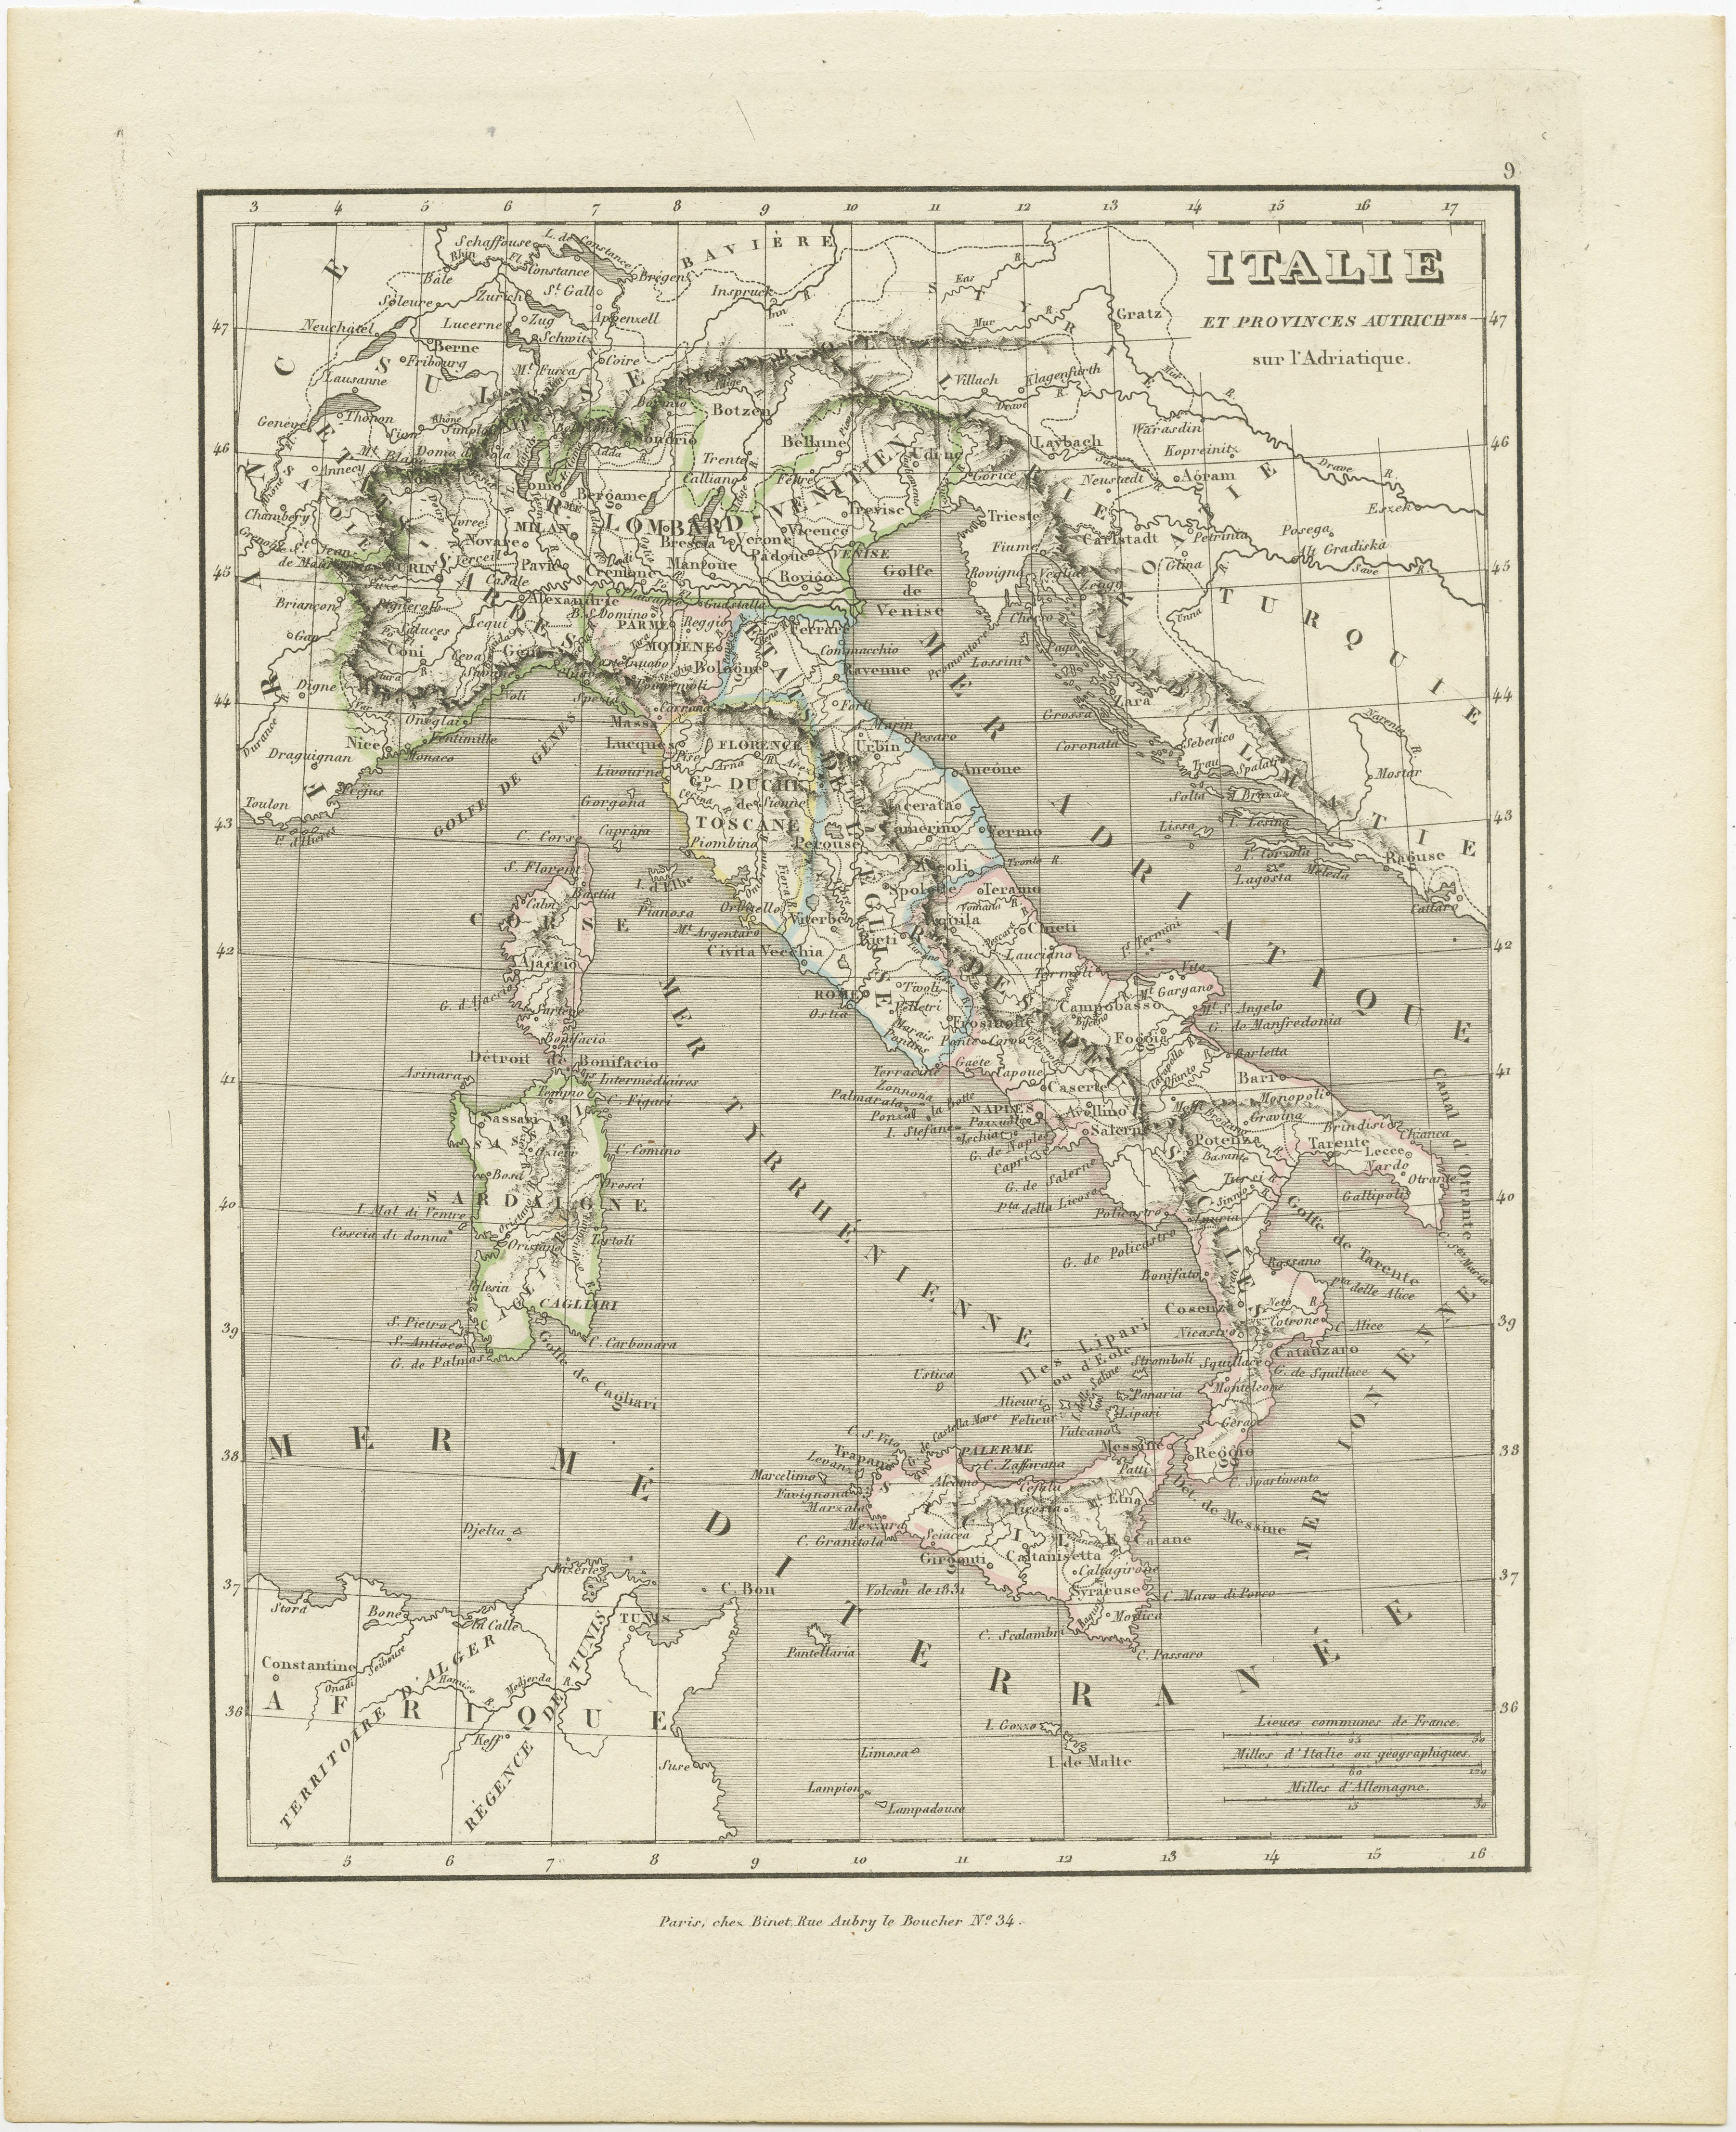 Antique map titled 'Italie et Provinces Autrichnes sur l'Adriatique'. Original old map of Italy and surroundings. Also shows Sicily and Sardinia. Originates from 'Dictionnaire Universel de Geographie (..)'. Published by Binet, circa 1842.